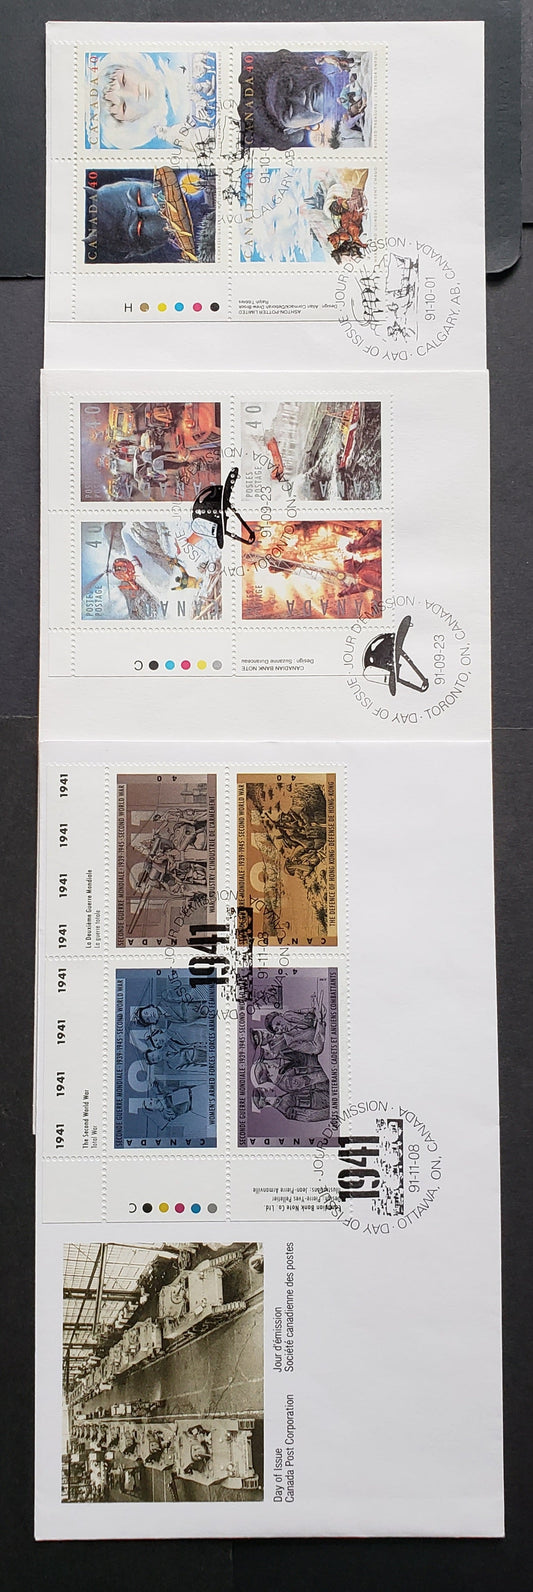 Lot 95 Canada #1333a, 1337a, 1348a 40c Multicolor 1991 Canadian Folklore - WW2 Issues, 3 Canada Post FDC's Franked With UL Inscription Blocks, Approx 22,000 Of Each Produced, Cat. Value $11.1